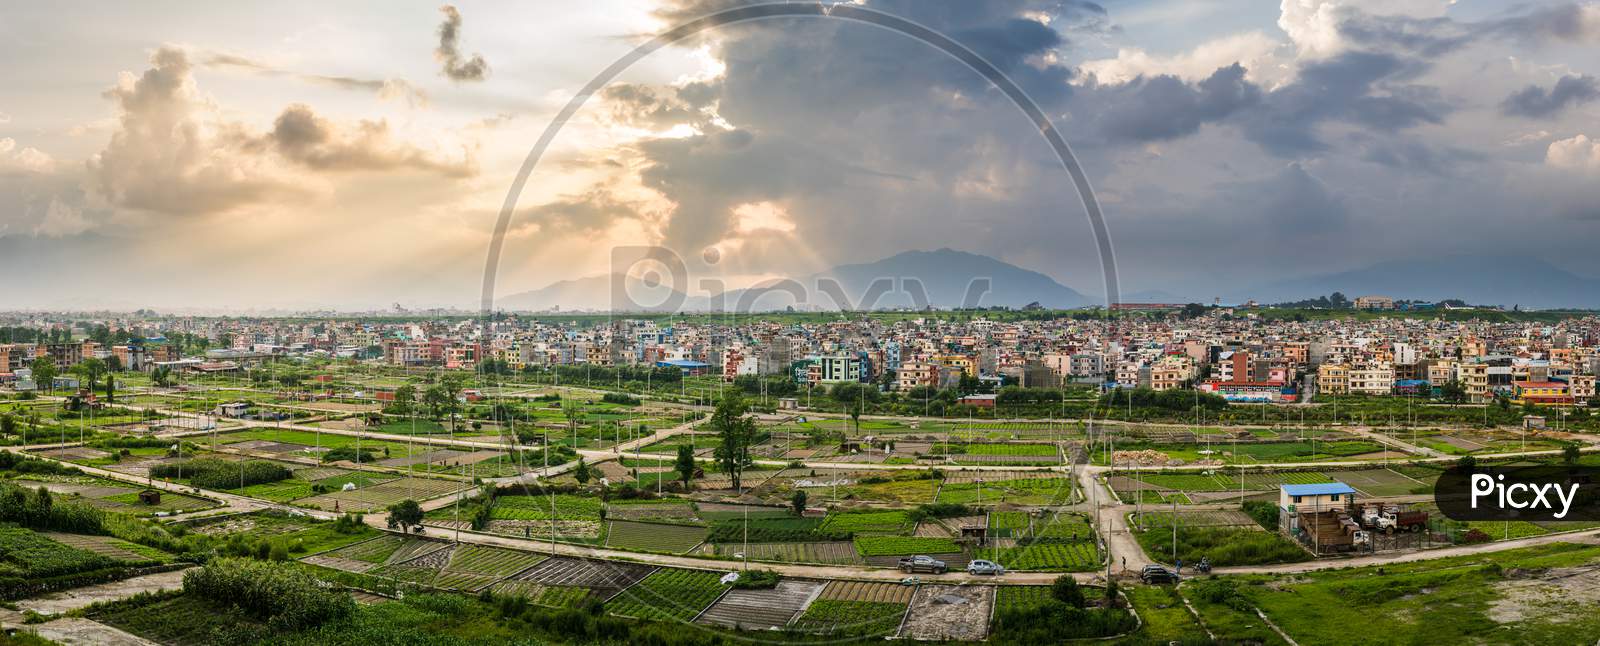 Panorama of plotted land for housing nearby dense settlement of Kathmandu. the plots of lands are cultivated with seasonal crops by local farmers.